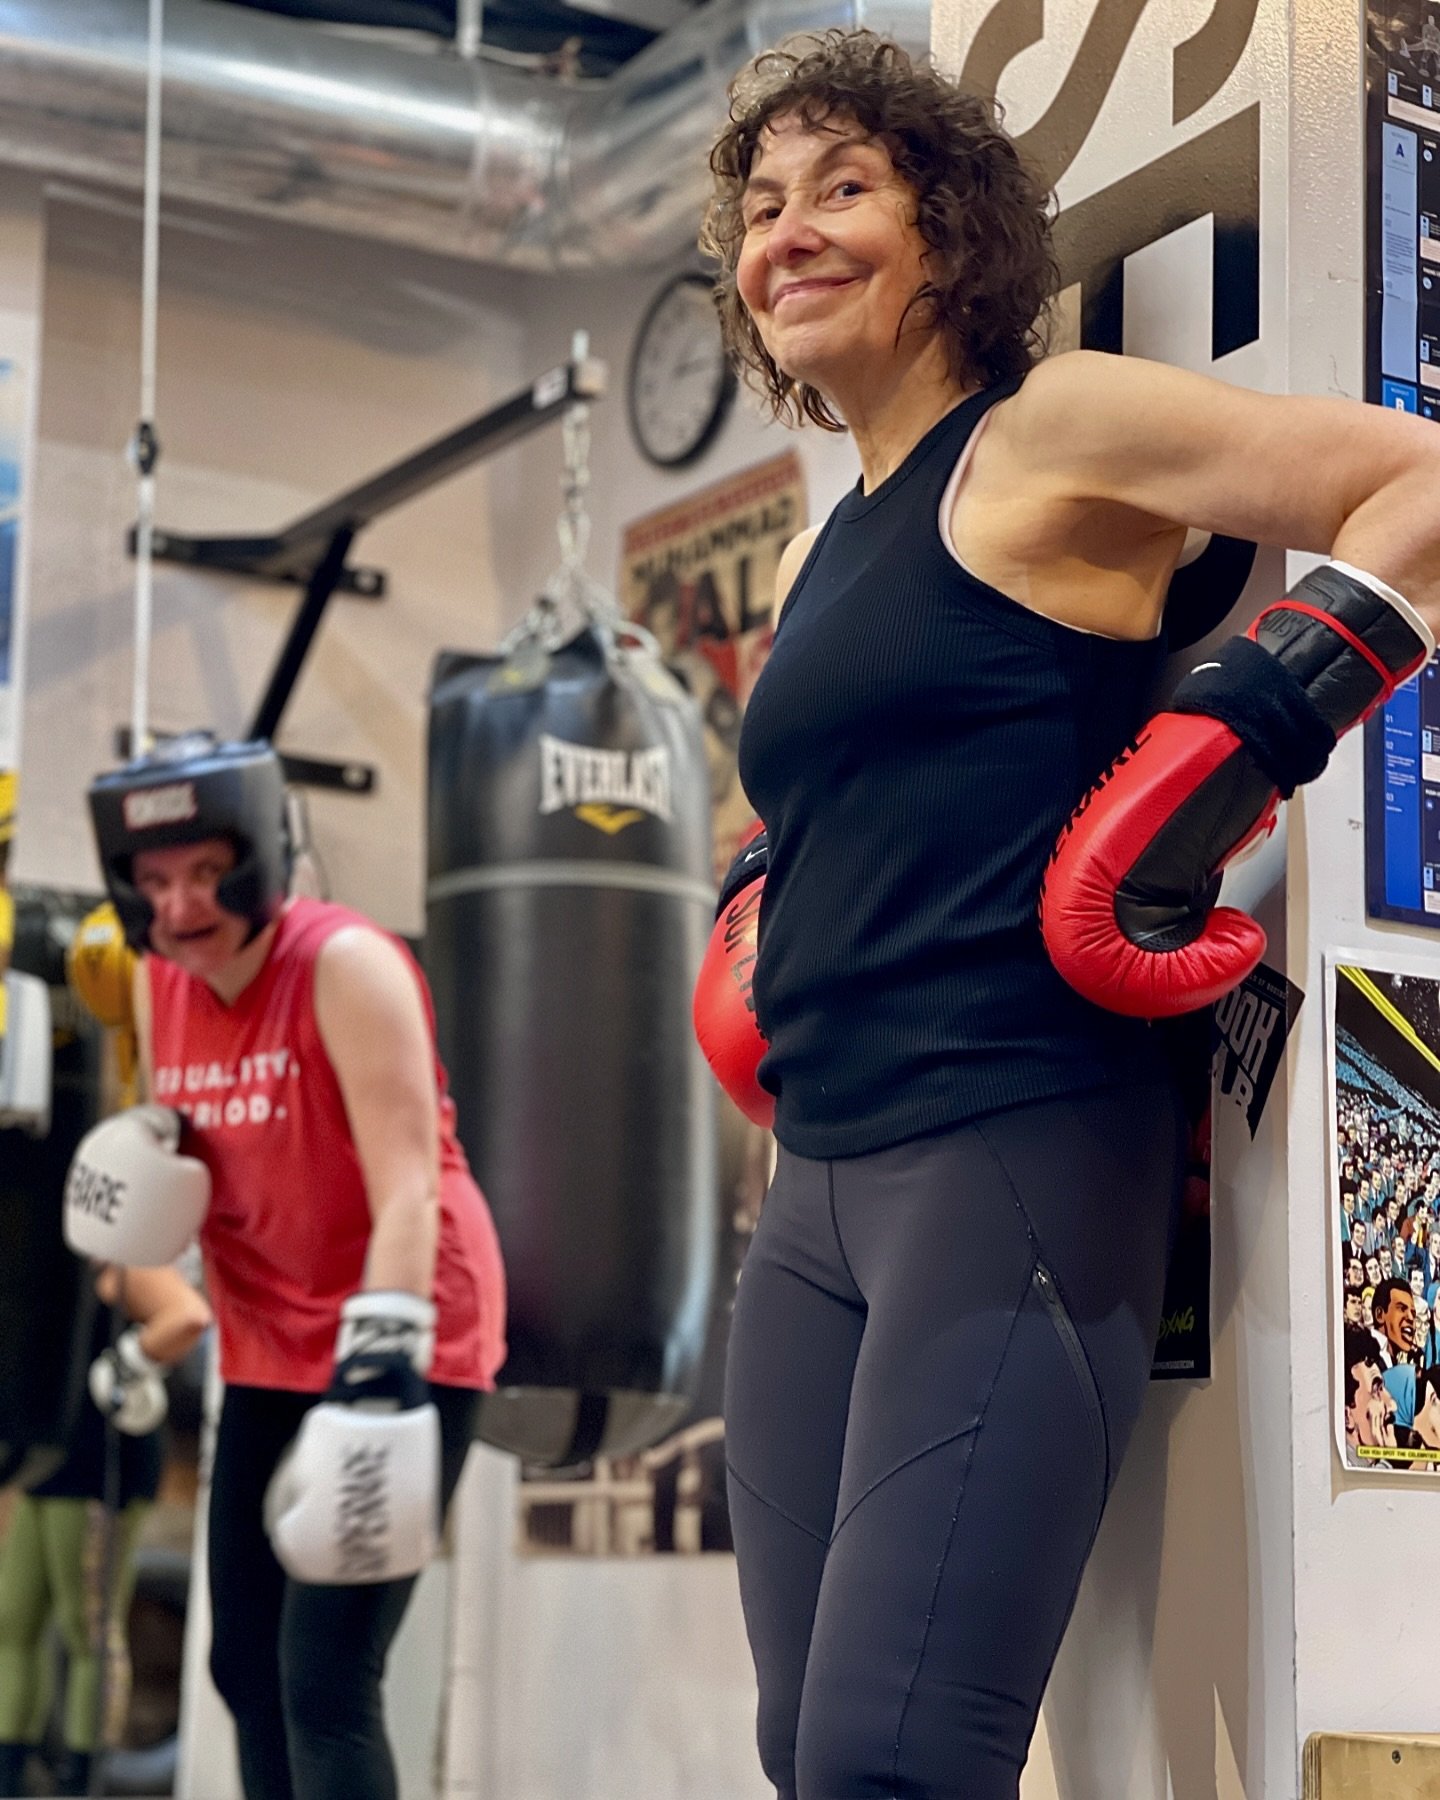 Do things that make you happy and celebrate you everyday😉🥊
Happy Mother&rsquo;s Day 🌺🥊🥊
#wwboxnyc
#mothersday
#boxing
#sunday
#boxinytherapy
@wwboxnyc